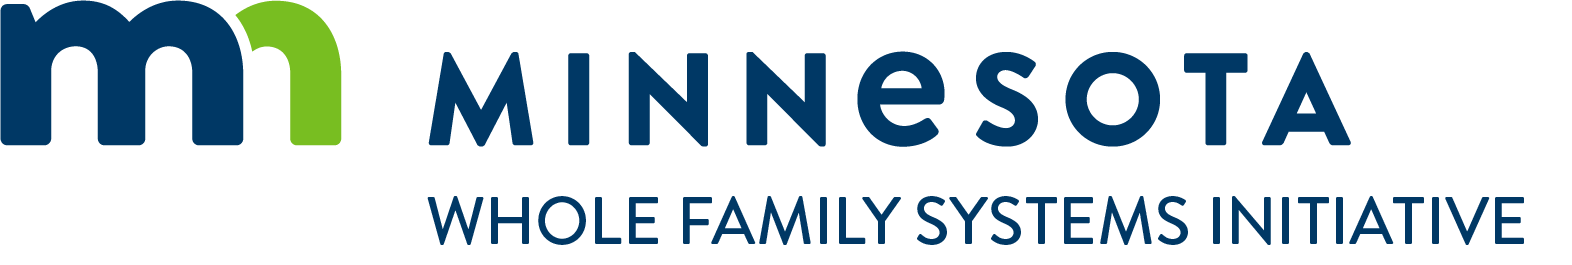 Whole Family Systems Initiative printed logo